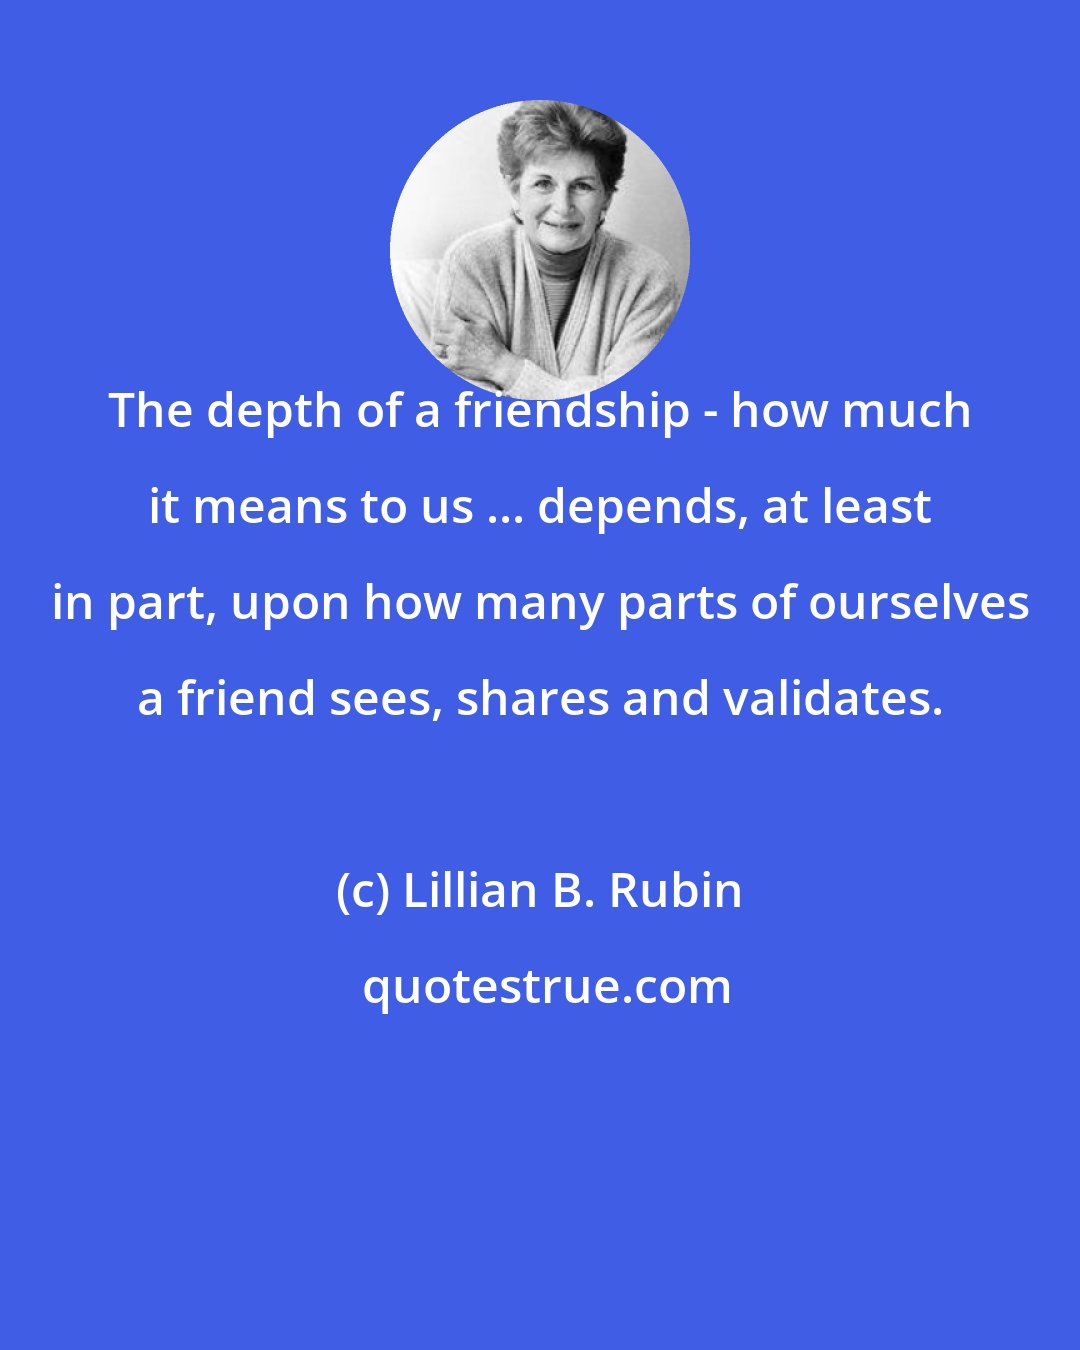 Lillian B. Rubin: The depth of a friendship - how much it means to us ... depends, at least in part, upon how many parts of ourselves a friend sees, shares and validates.